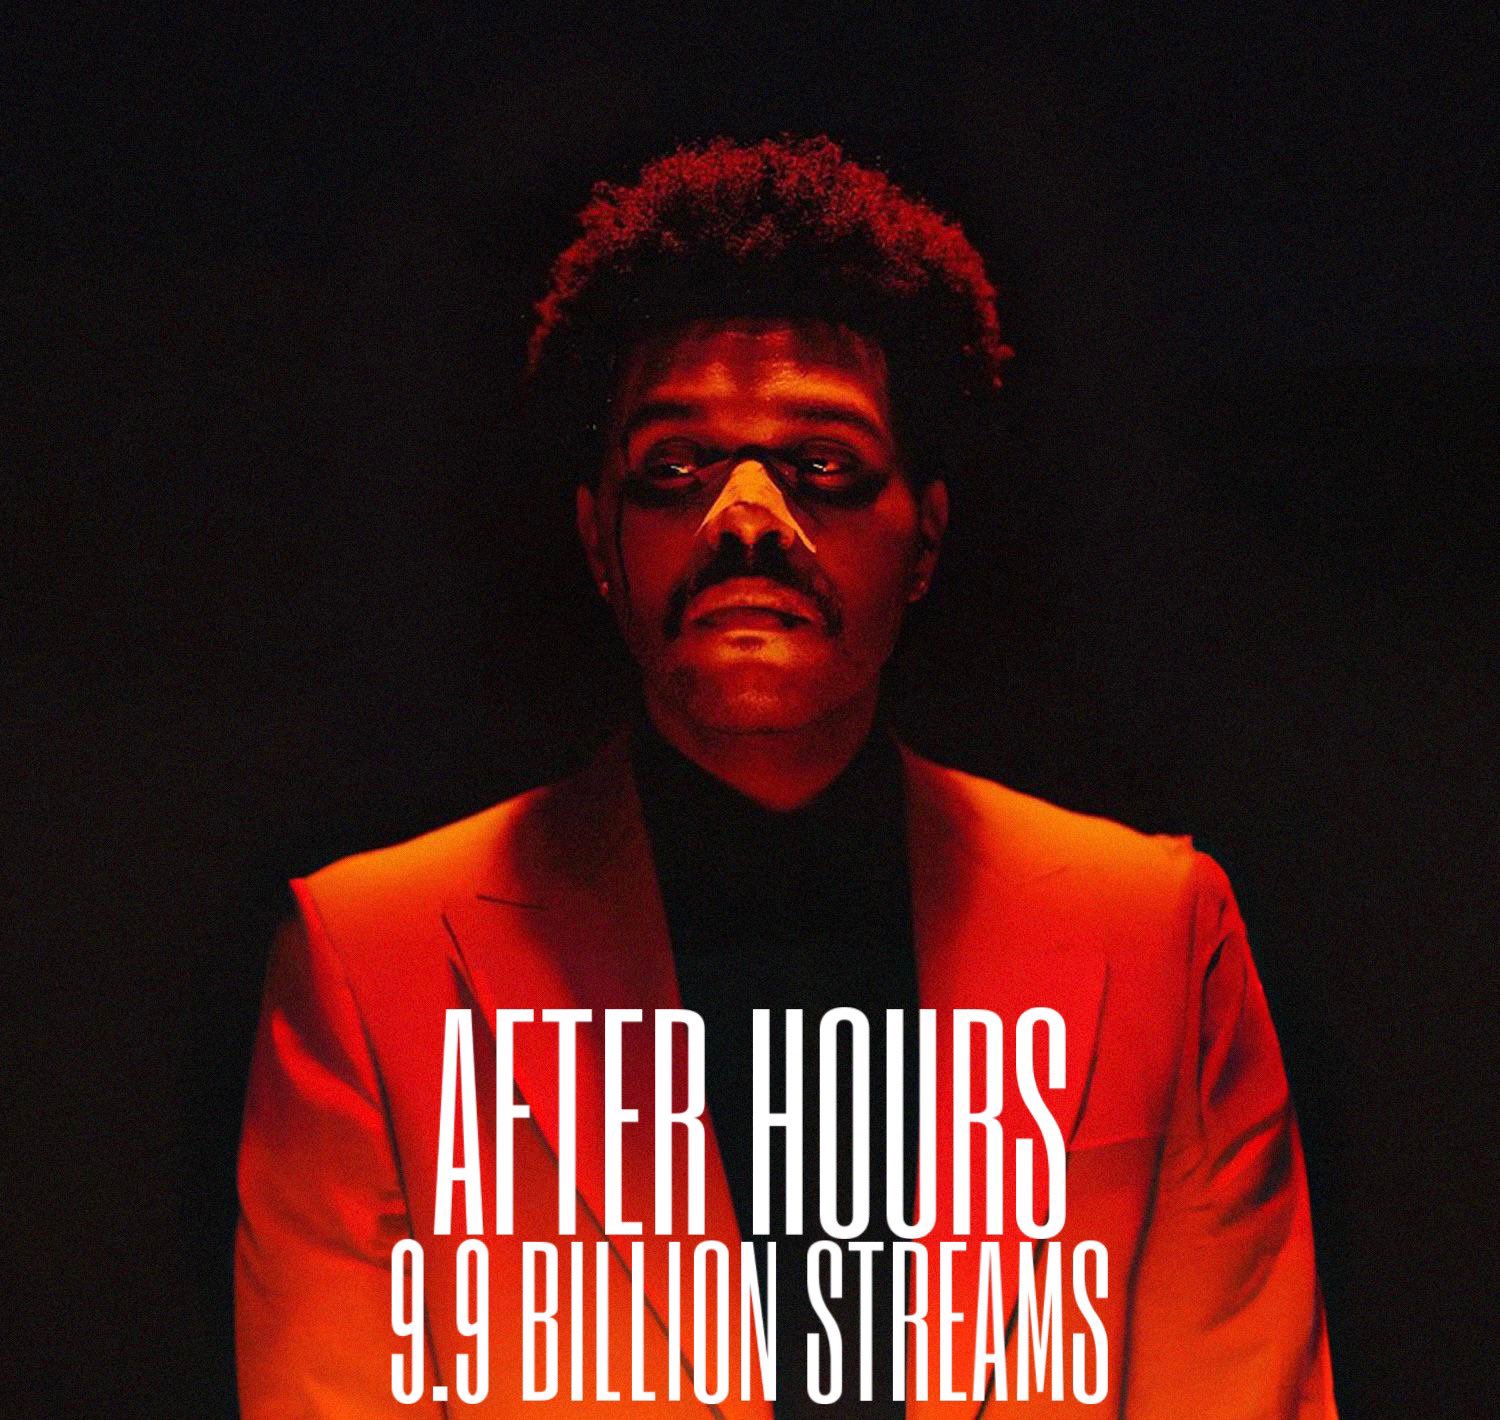 The Weeknd News on X: .@theweeknd's 'After Hours' (S) has now